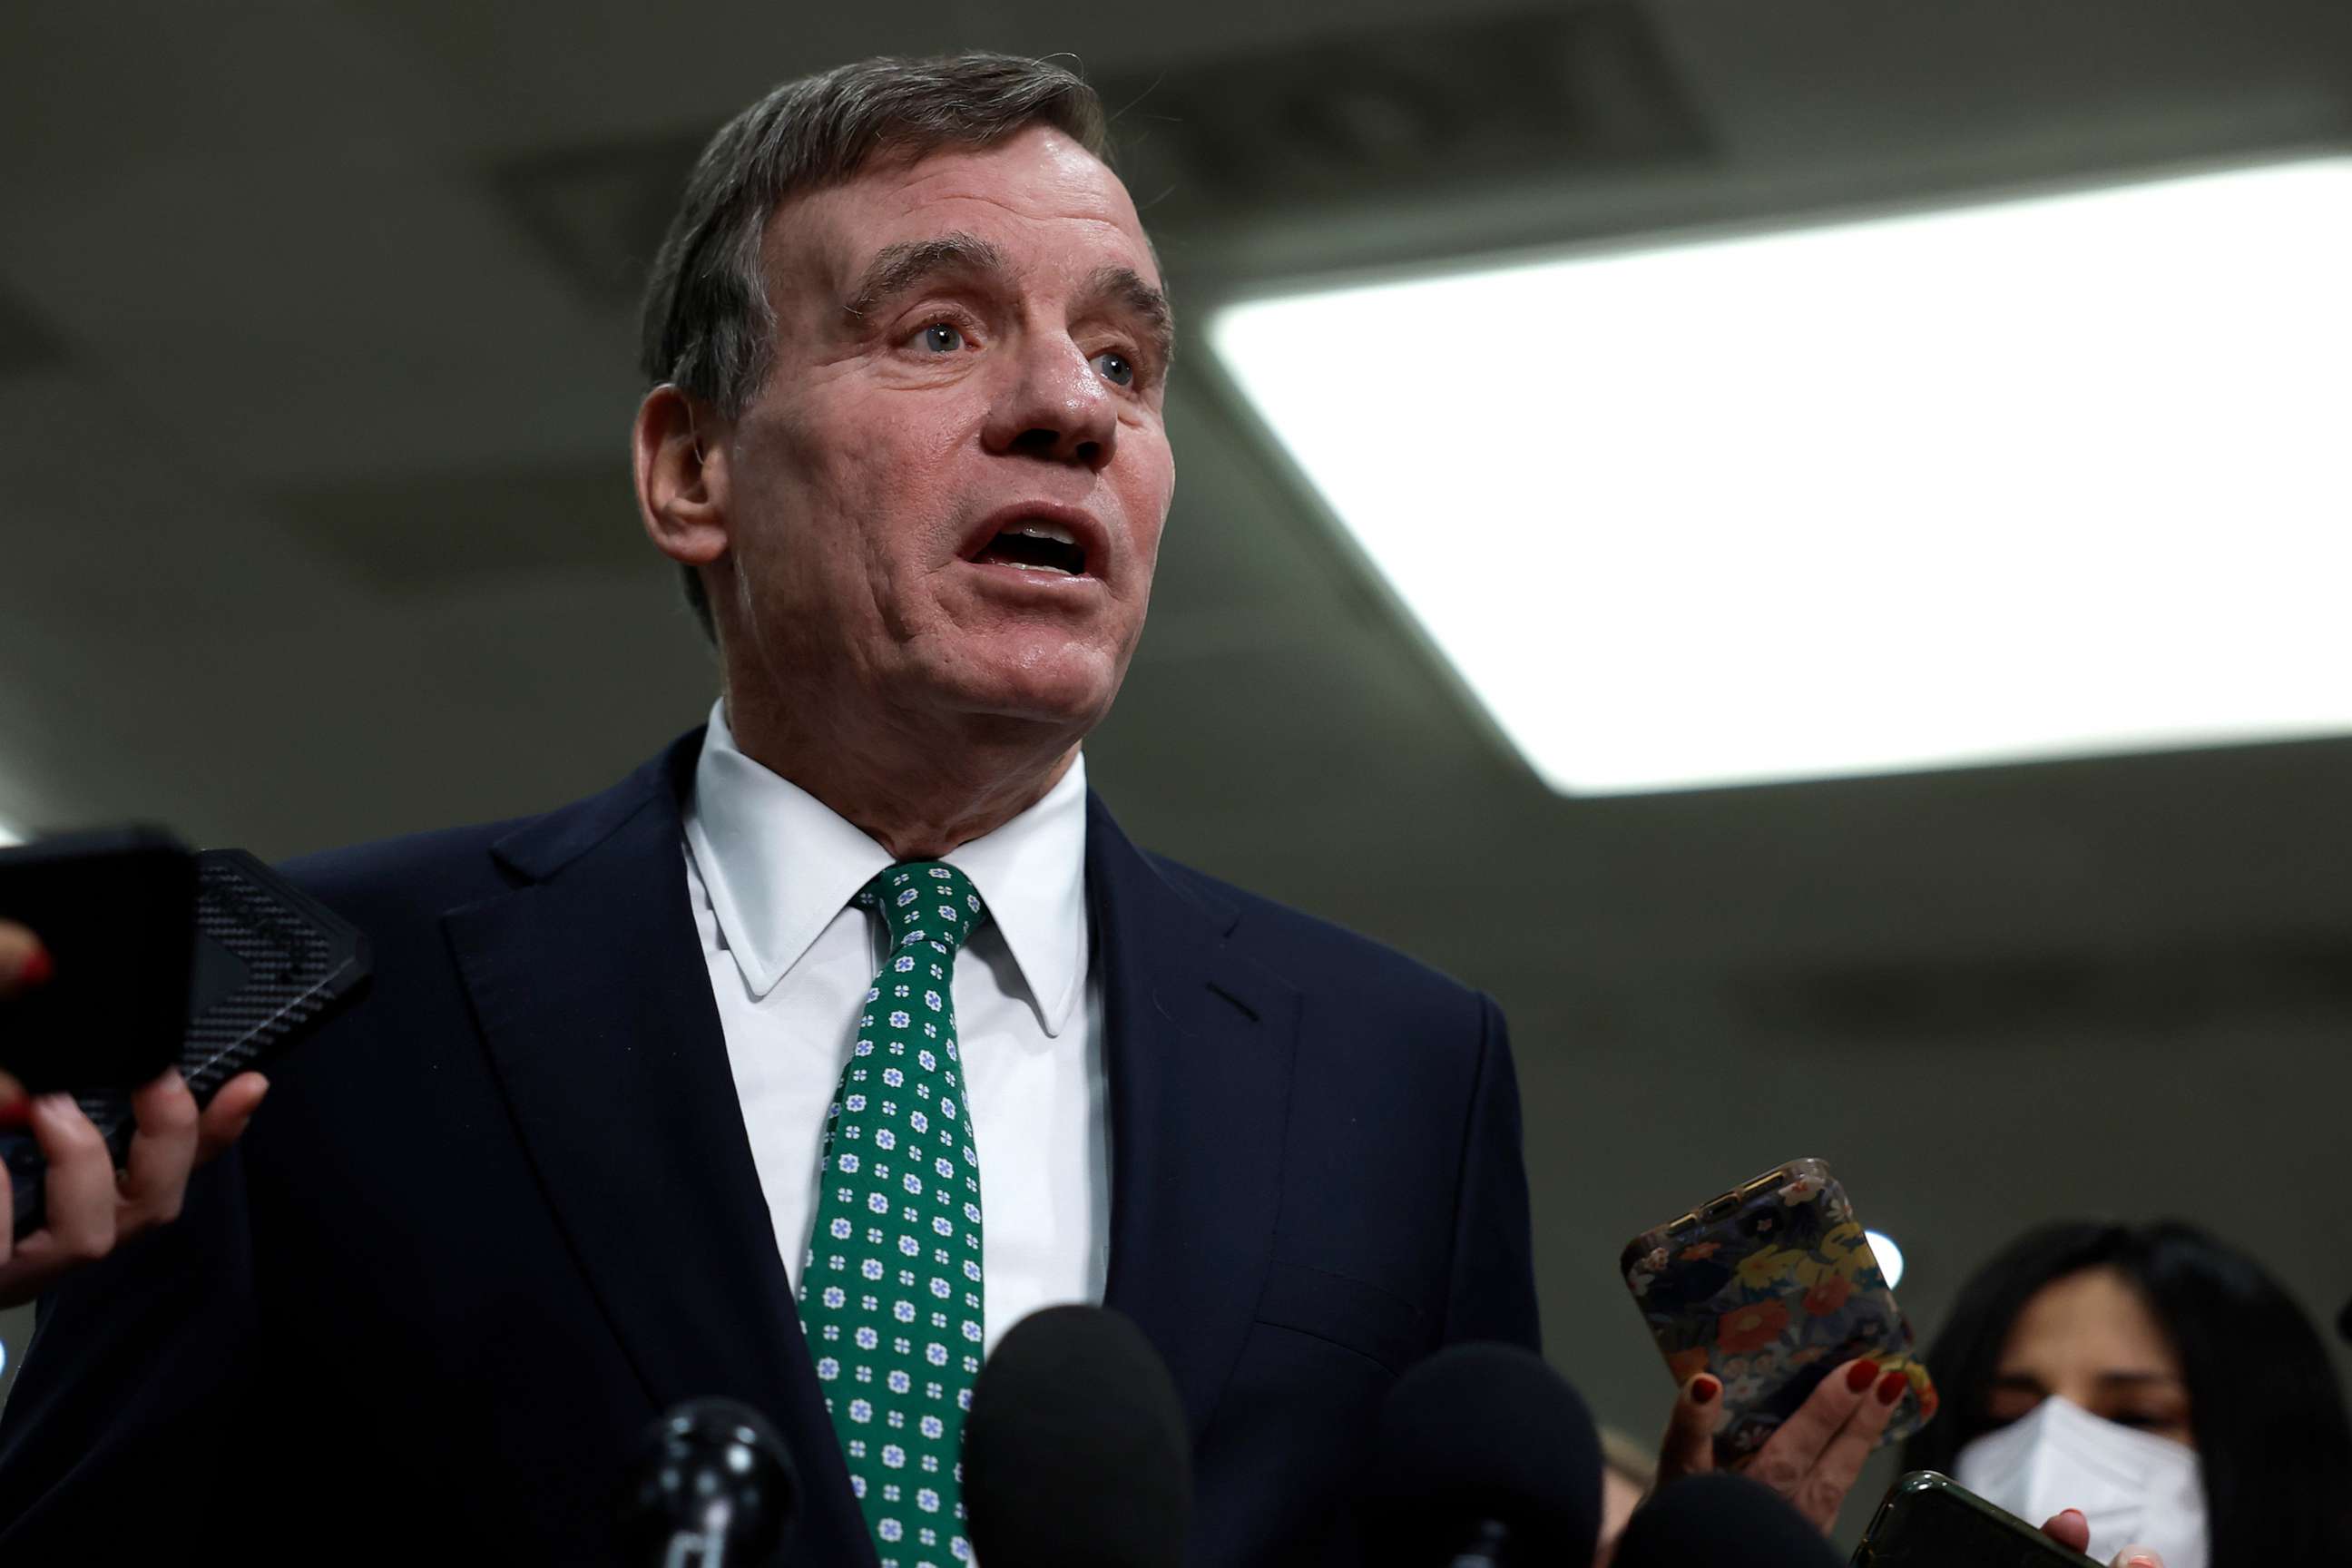 PHOTO: Sen. Mark Warner speaks with reporters after attending a closed-door, classified briefing for Senators at U.S. Capitol Building on Feb. 14, 2023, in Washington, D.C.